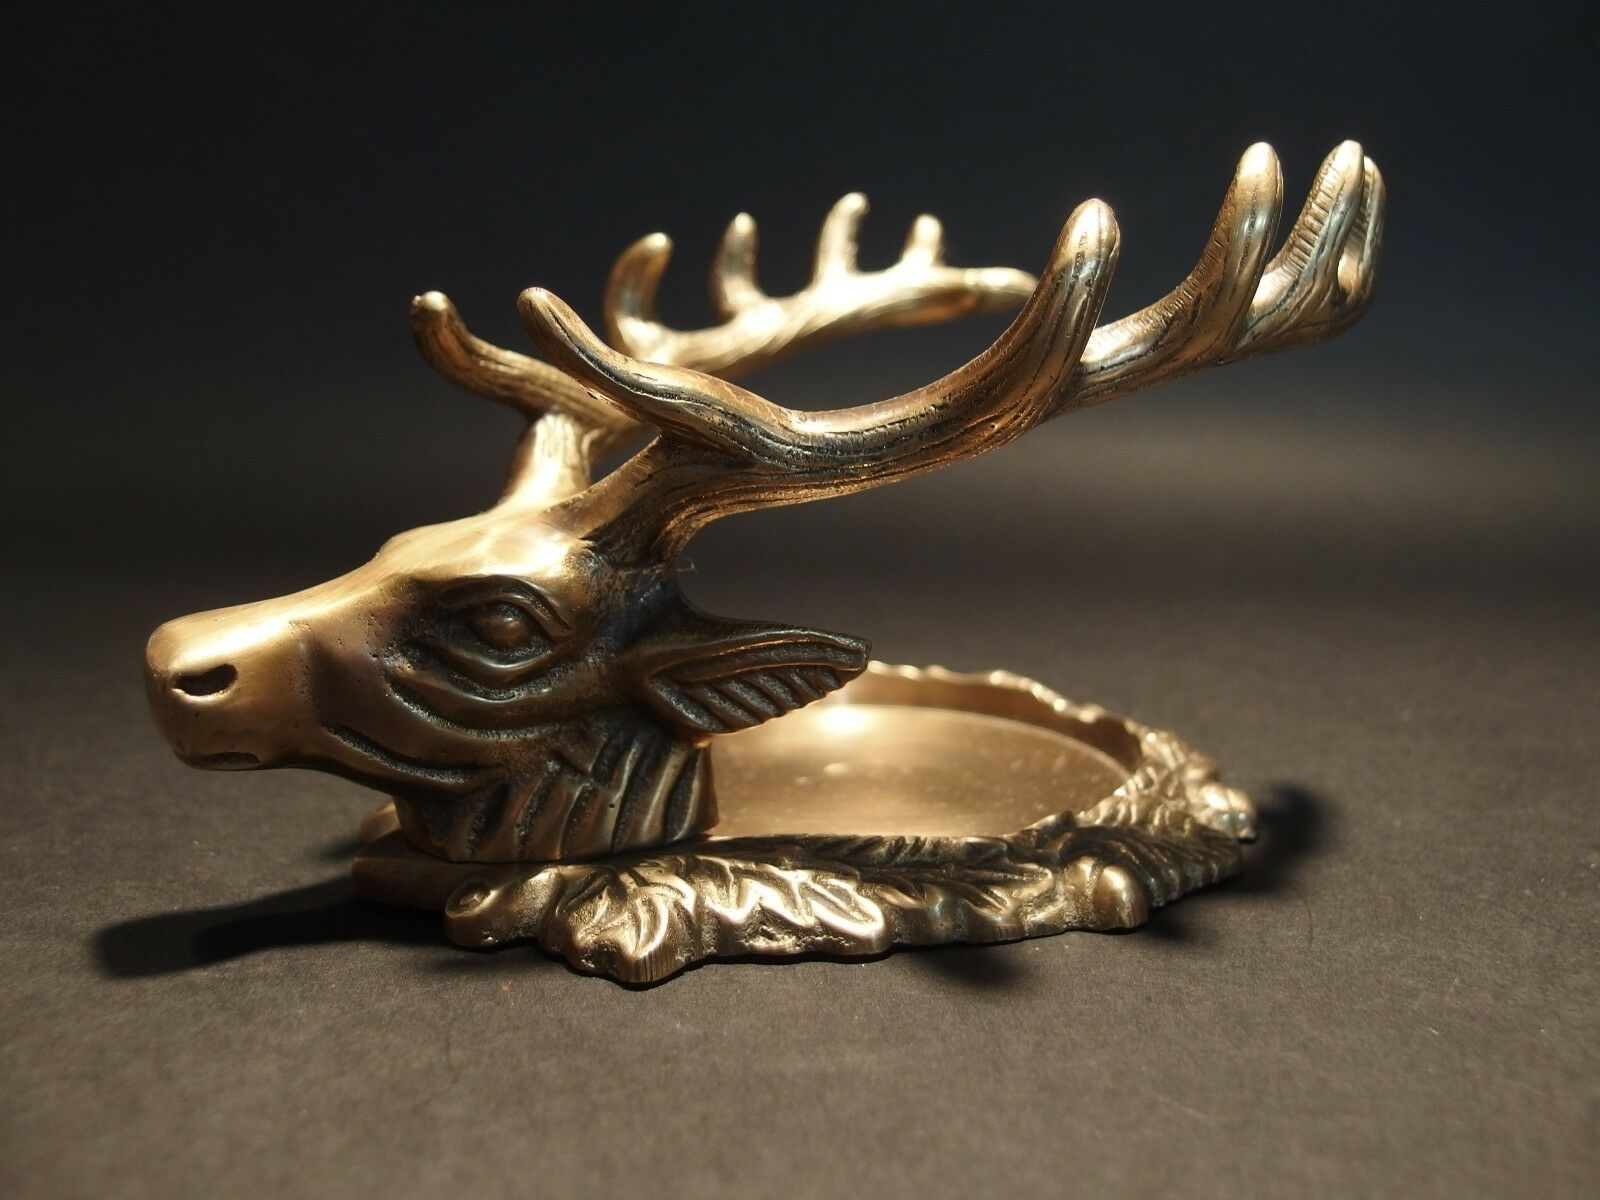 Antique Style Brass Elk Deer Stag Pen Inkwell Holder Desk Stand - Early Home Decor